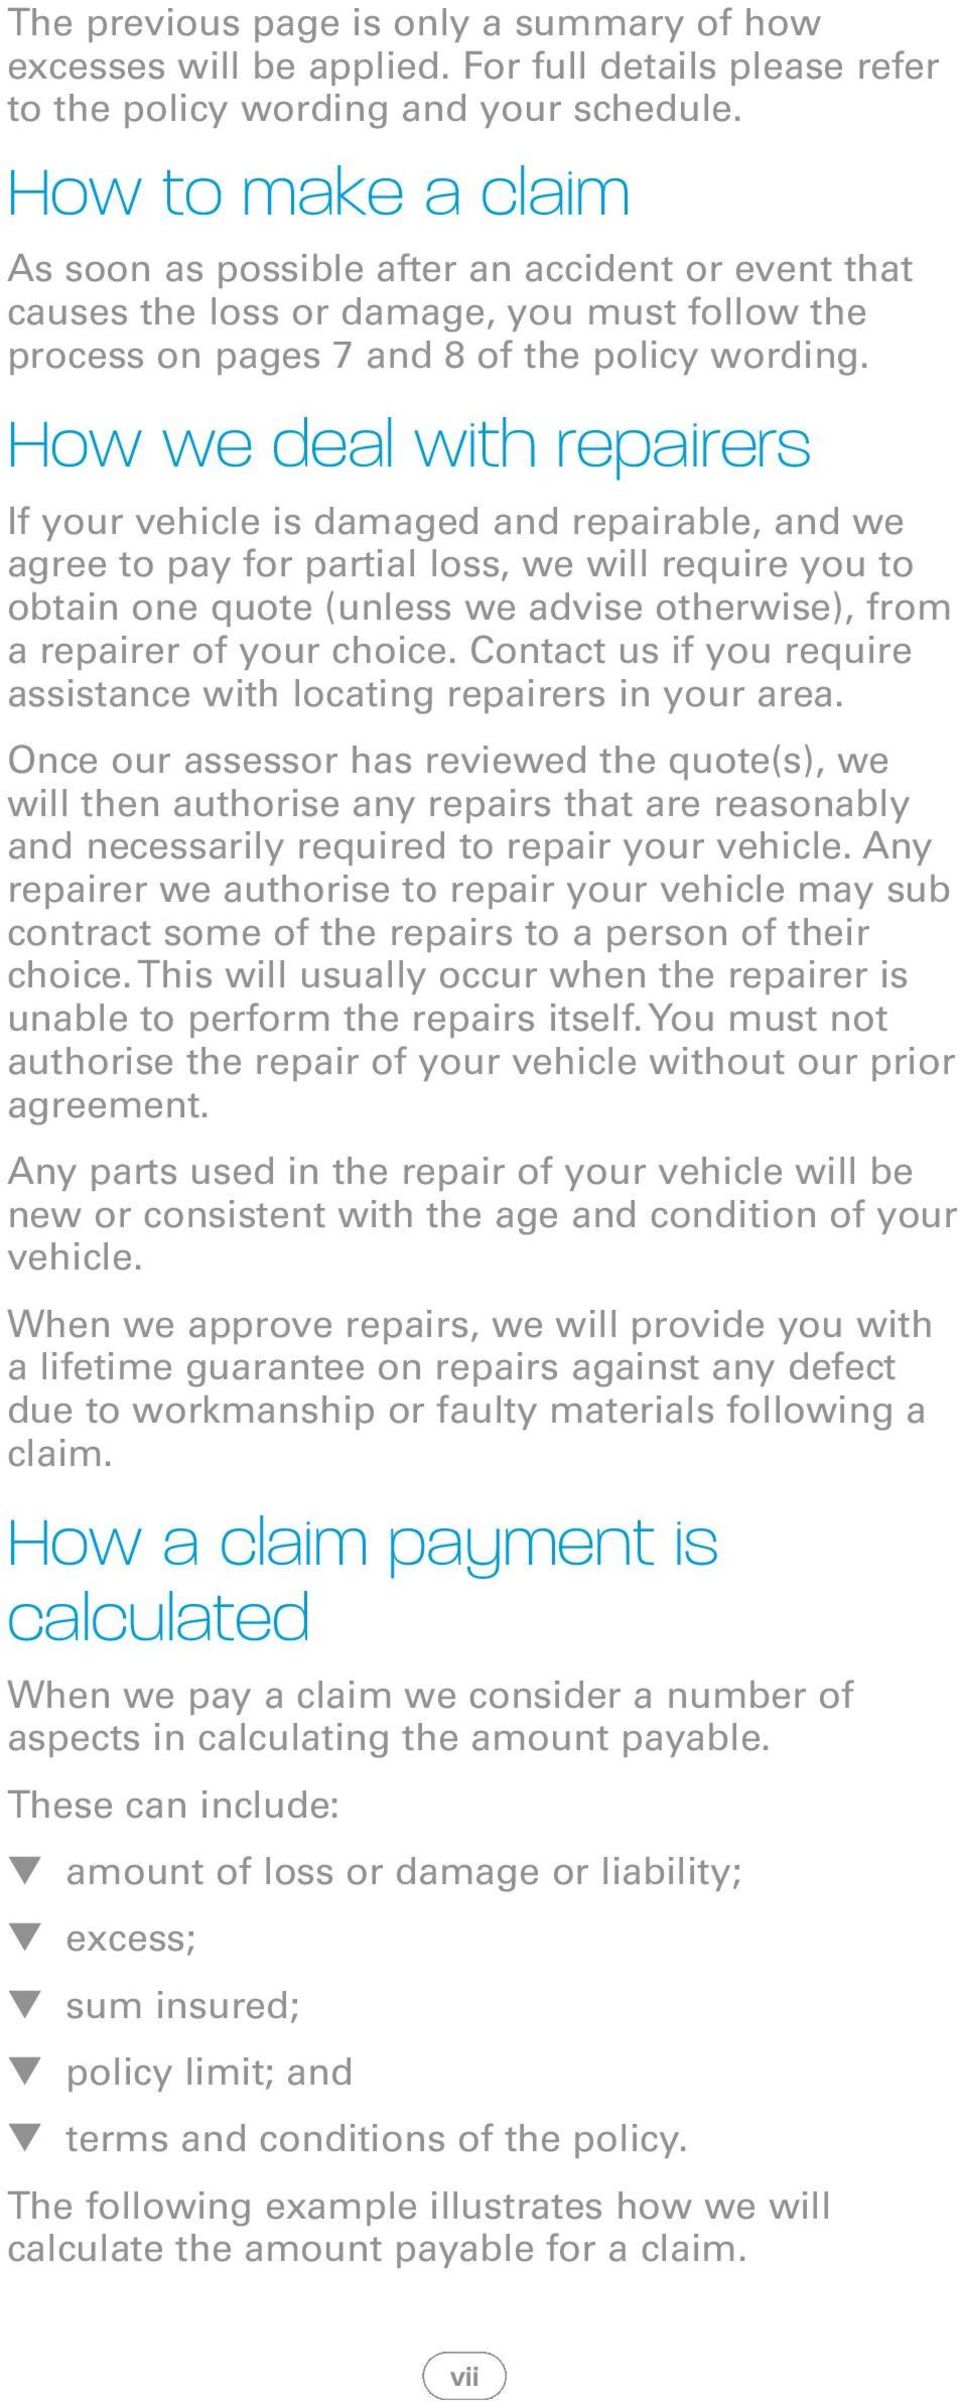 How we deal with repairers If your vehicle is damaged and repairable, and we agree to pay for partial loss, we will require you to obtain one quote (unless we advise otherwise), from a repairer of